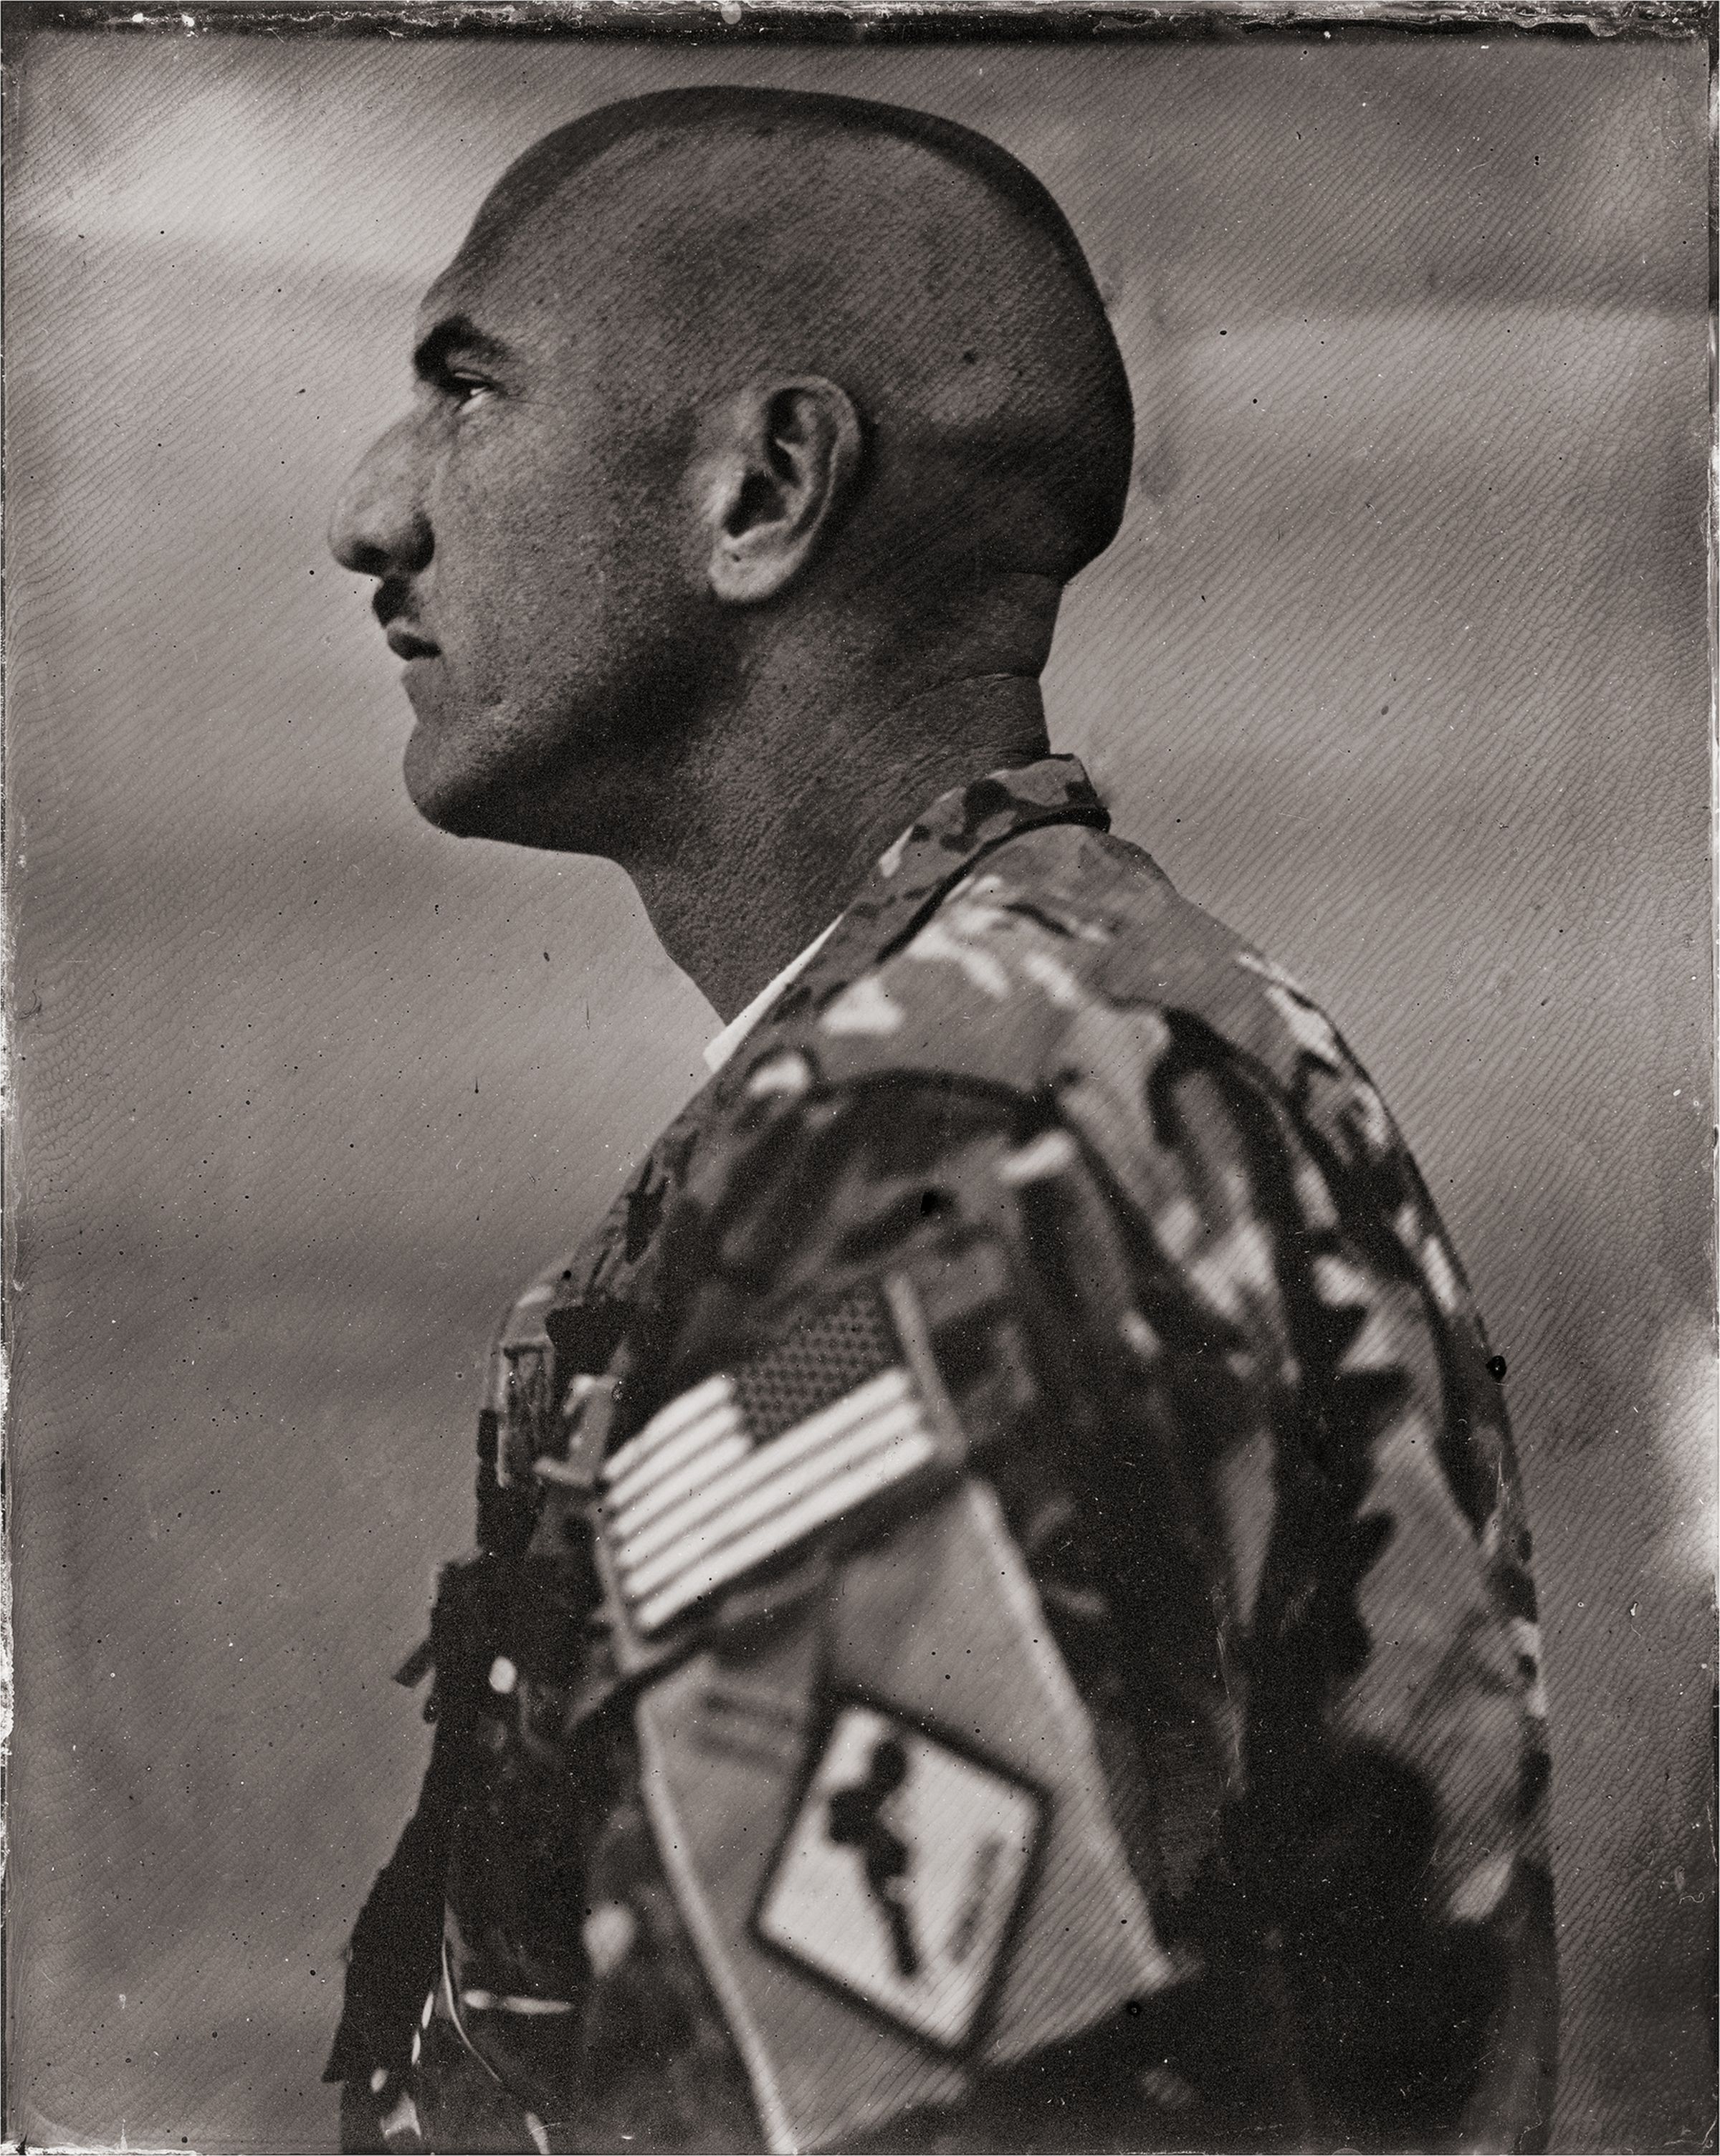 Civil War-style portraits of soldiers in Afghanistan